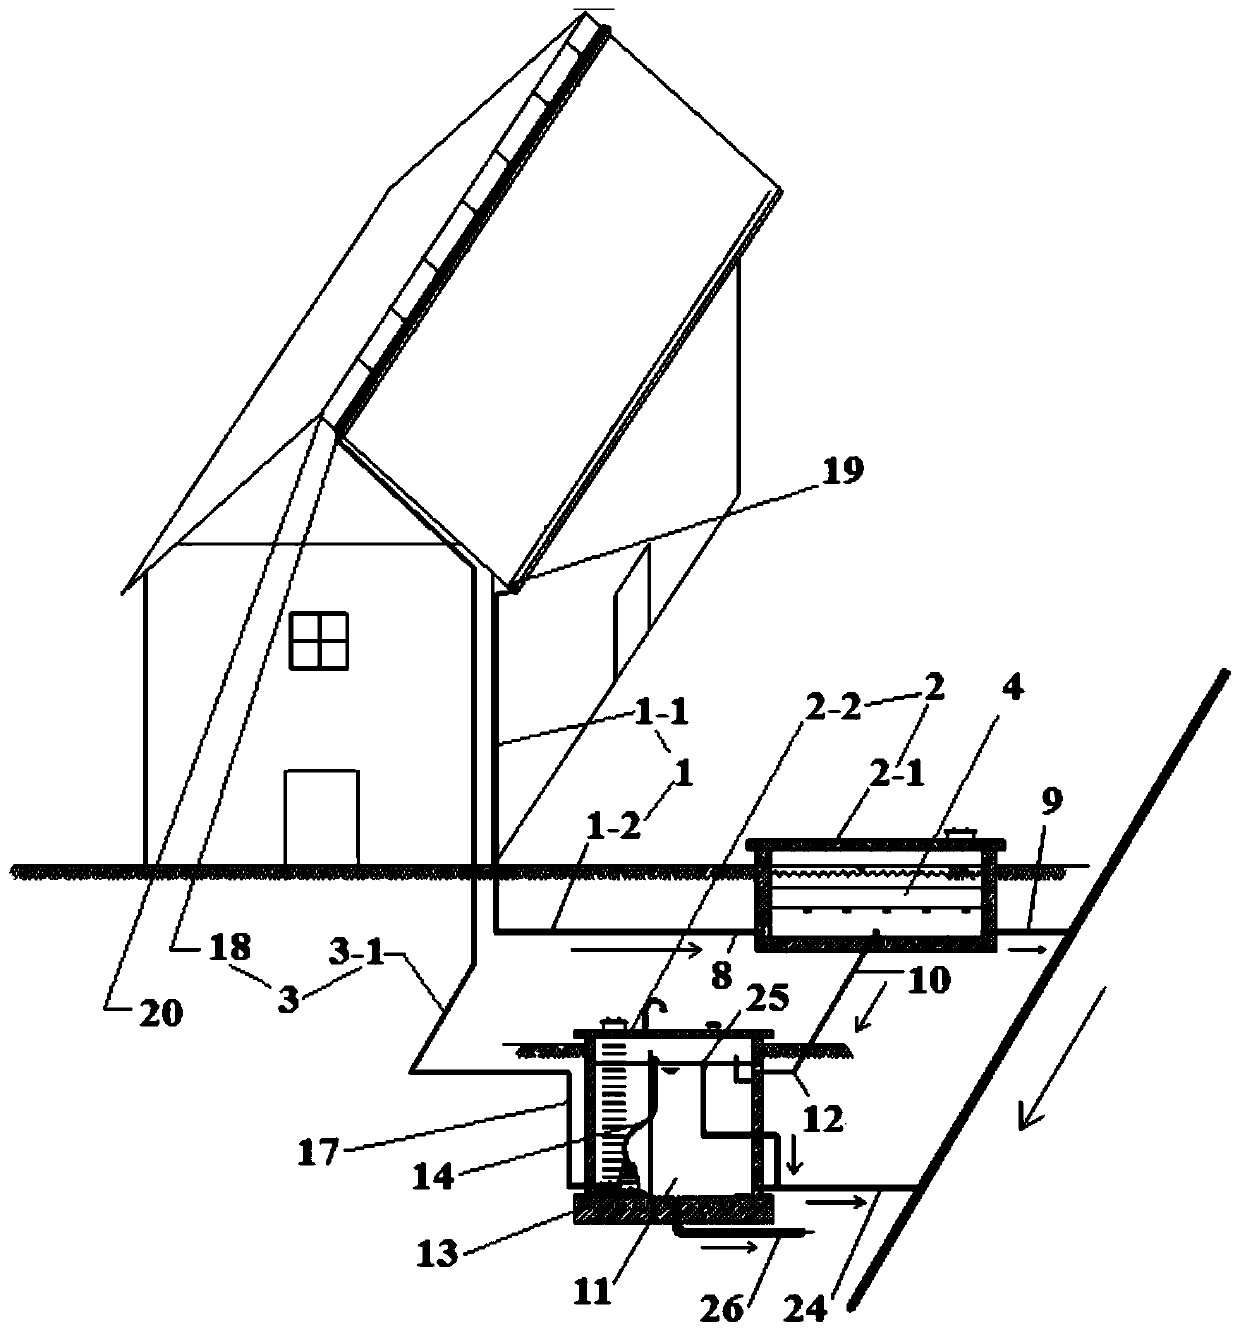 A method and device for indoor cooling by utilizing roof rainfall